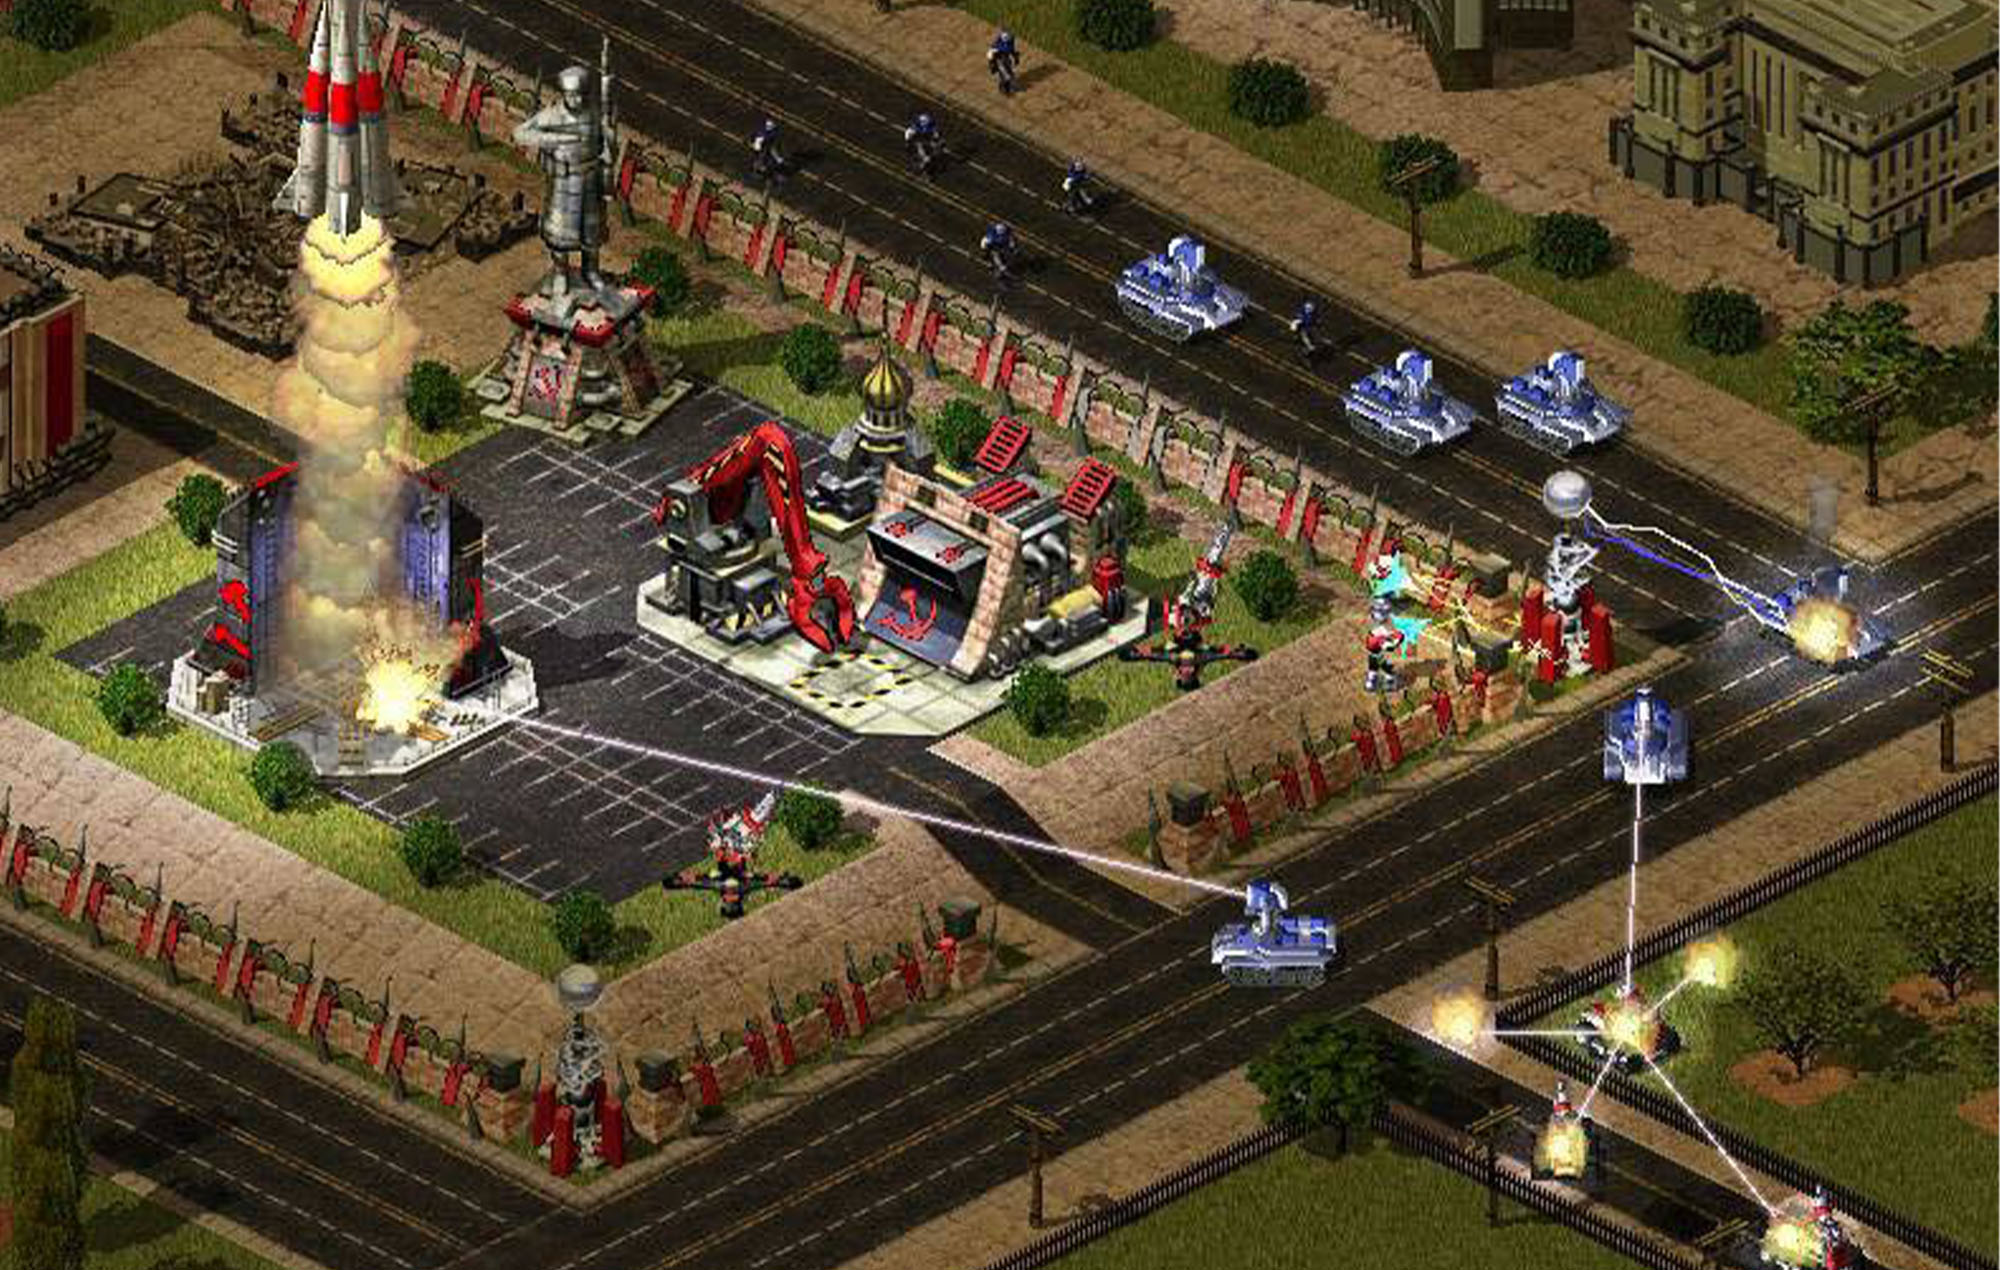 Ред дем 2. Command & Conquer: Red Alert 2. Command & Conquer: Red Alert 2 2000. Red Alert 2 Remastered. Red Alert 2000.